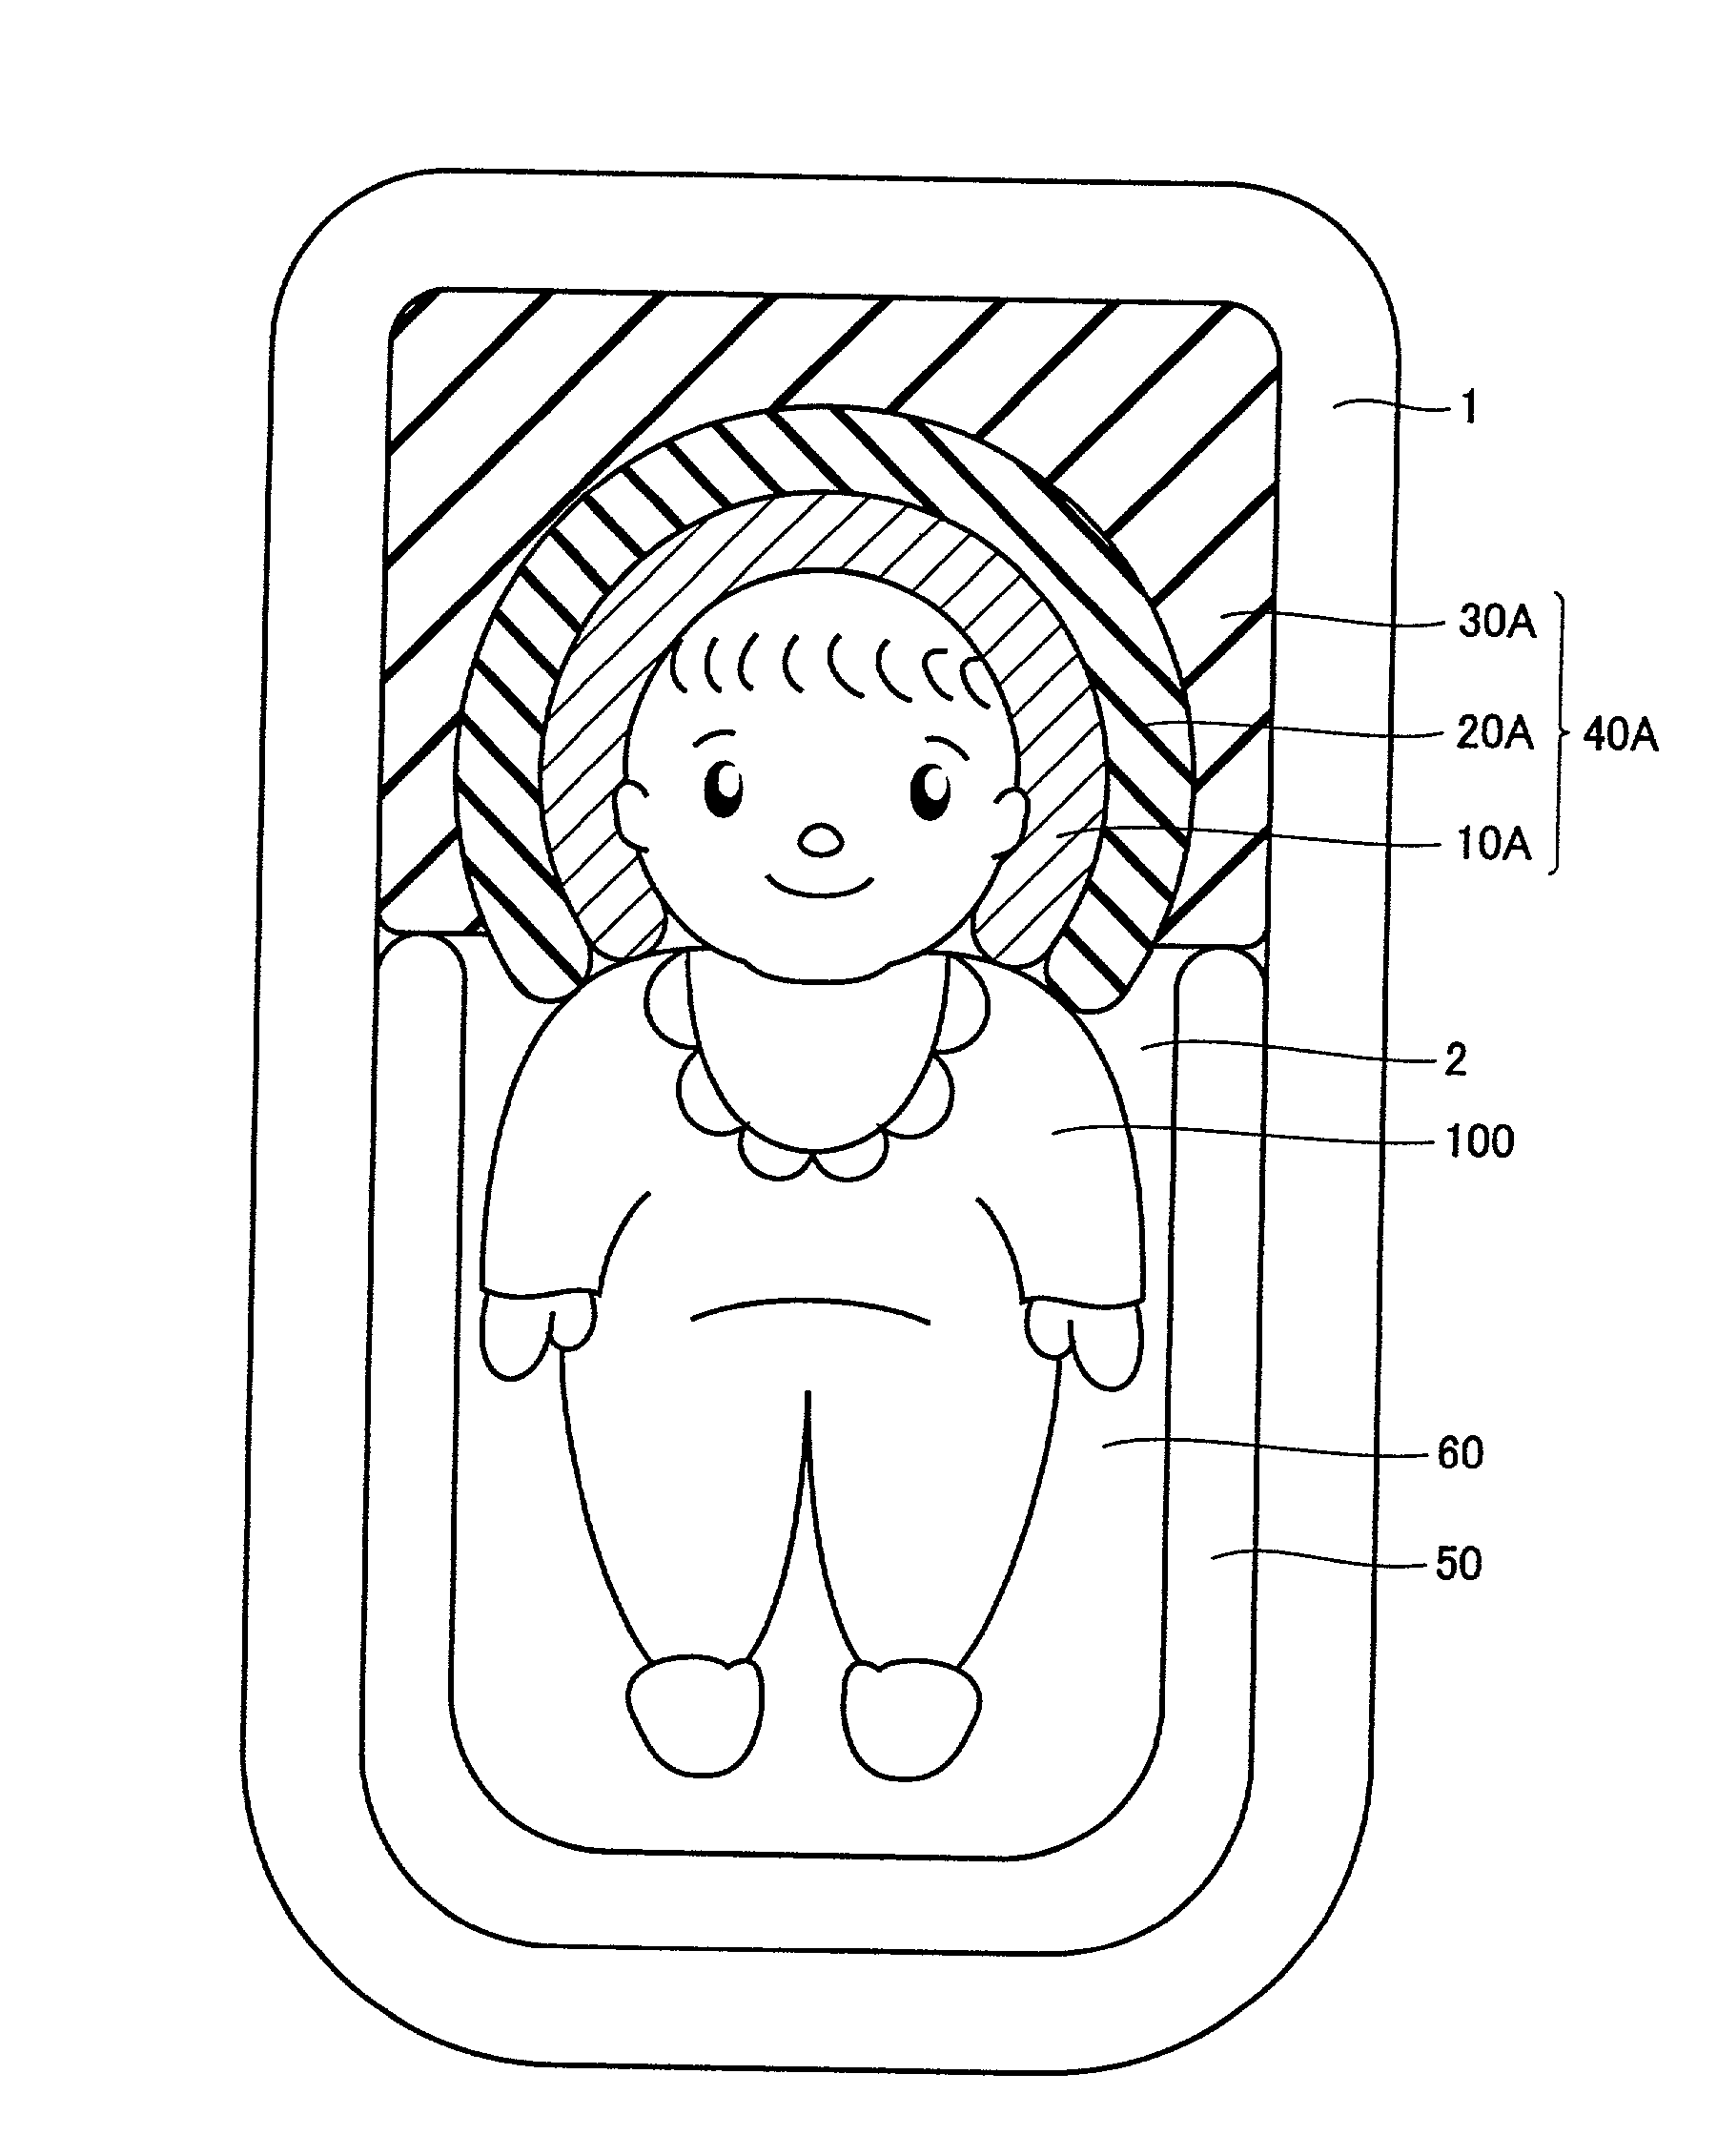 Heat protective structure of nursery equipment, head protective pad, and infant safety seat for car